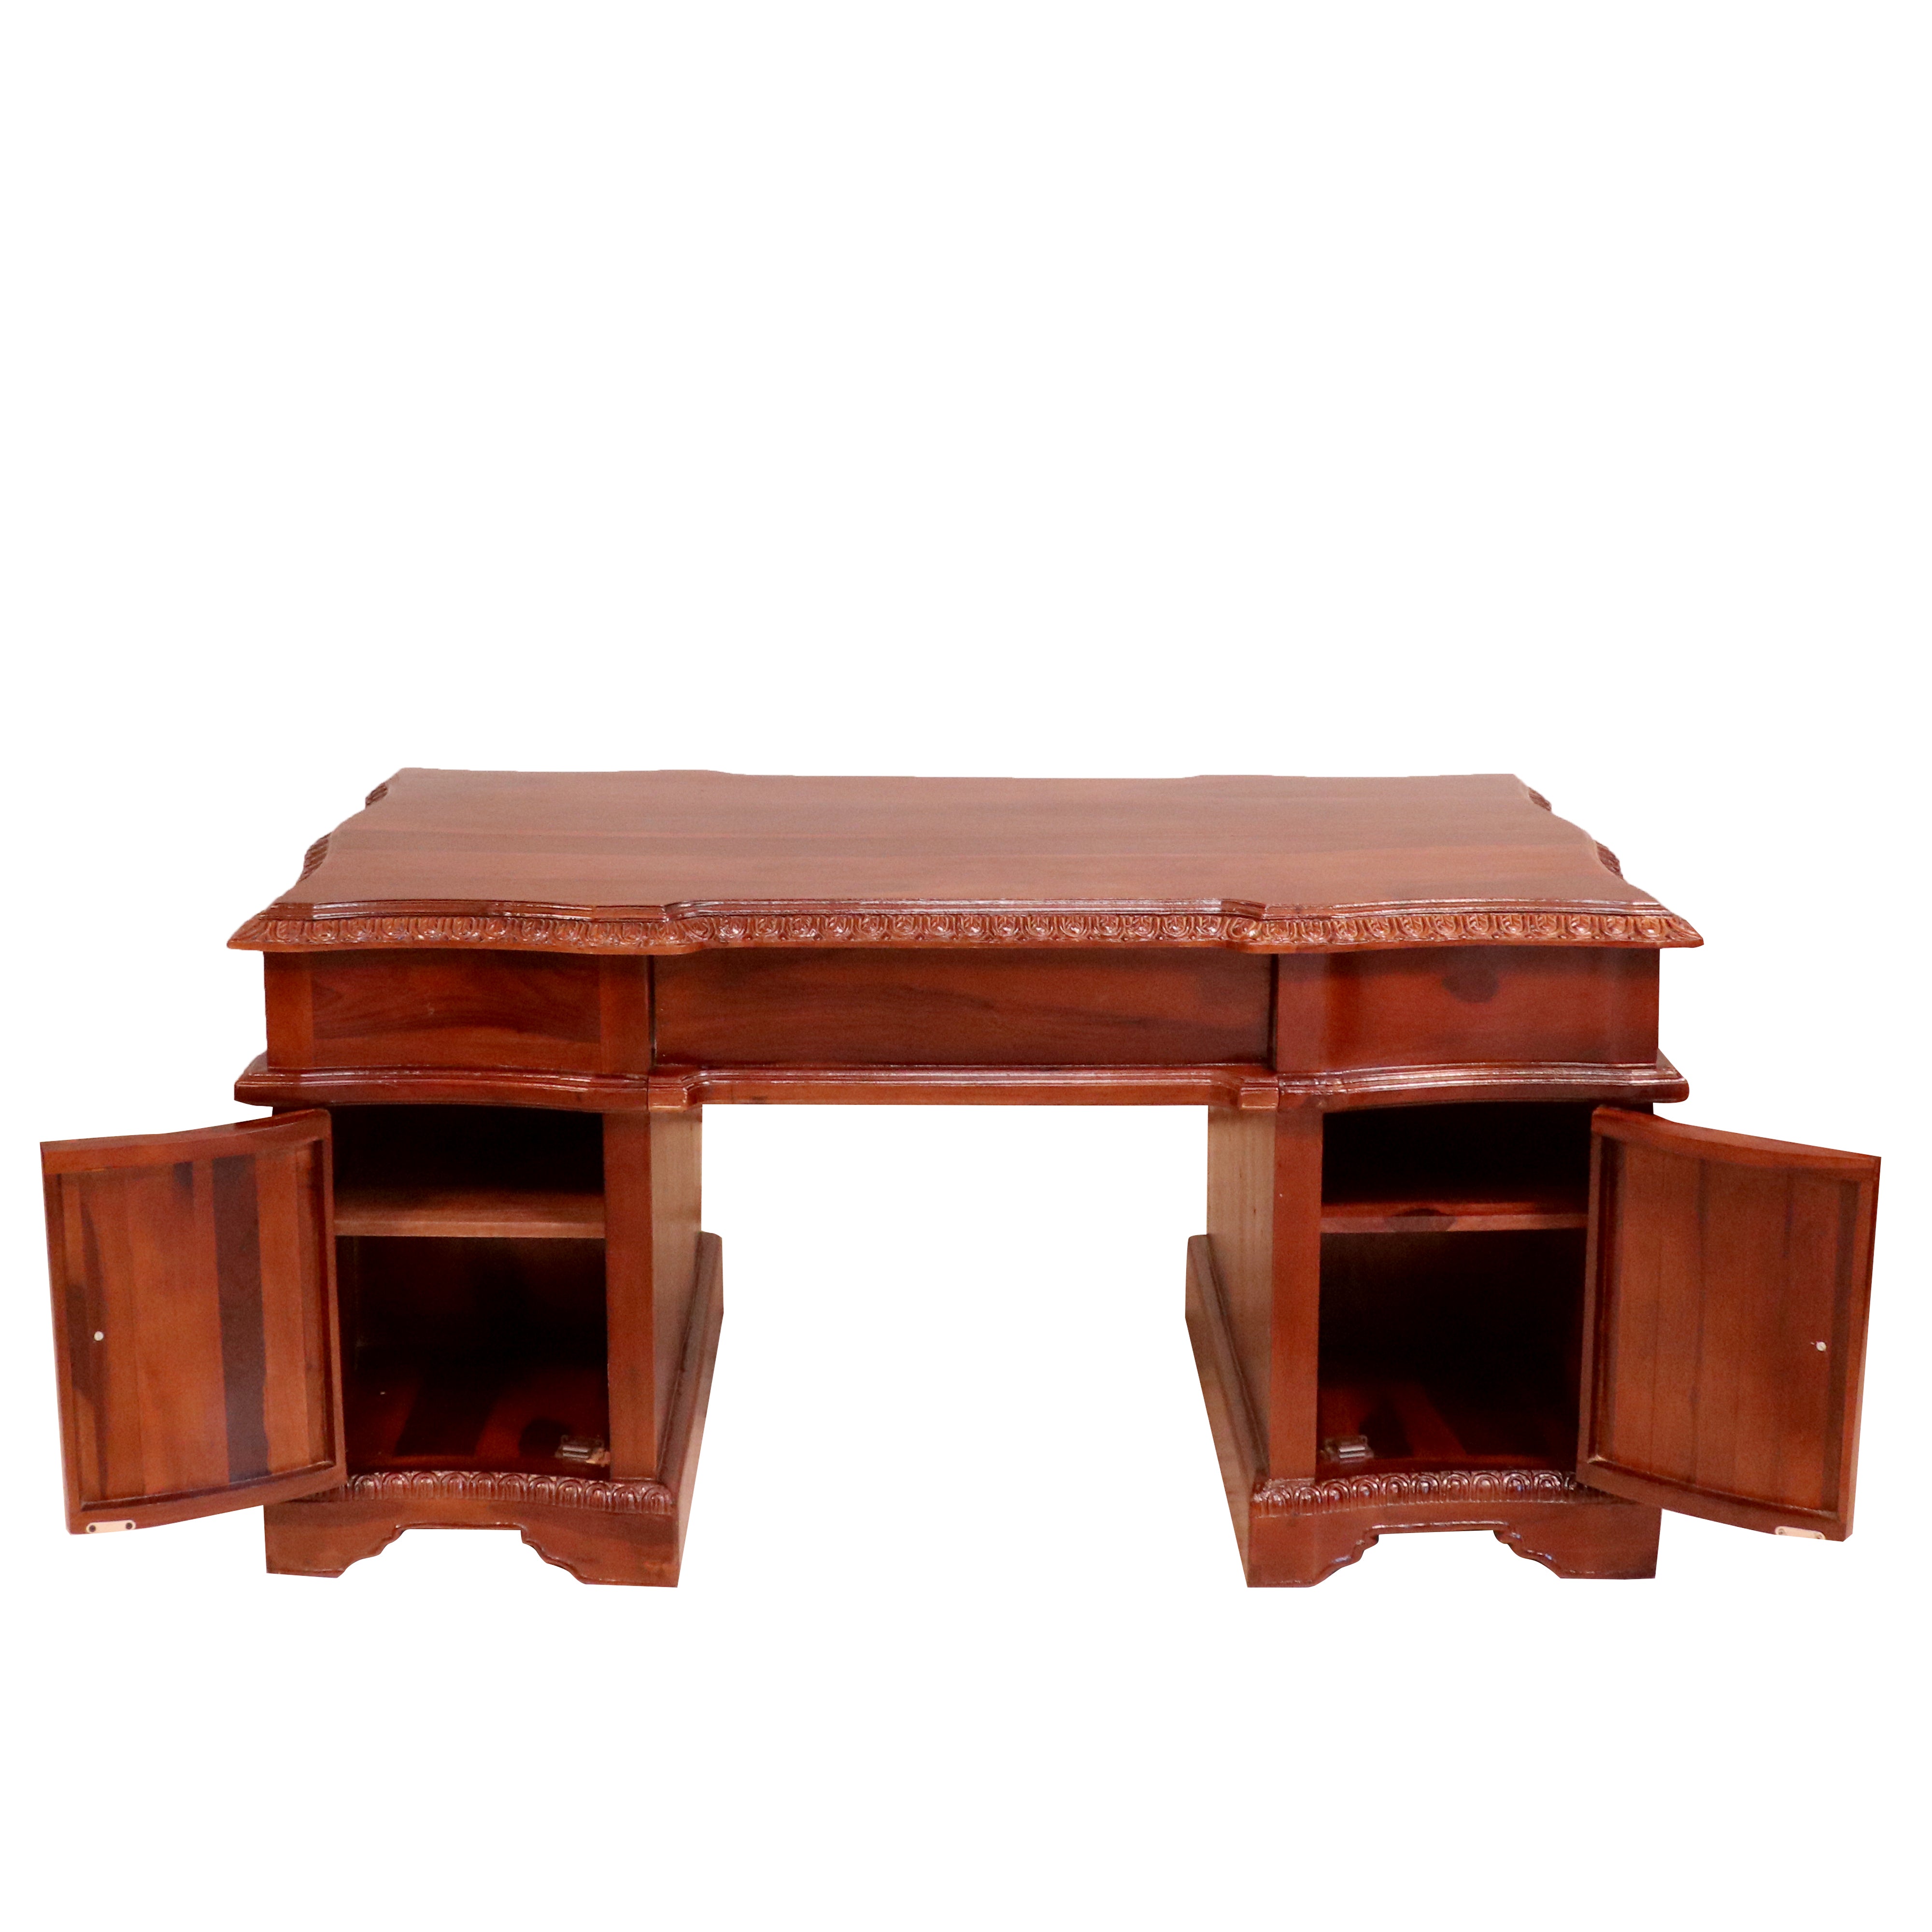 Executive Table with 3 drawer in Solid wood Study Table